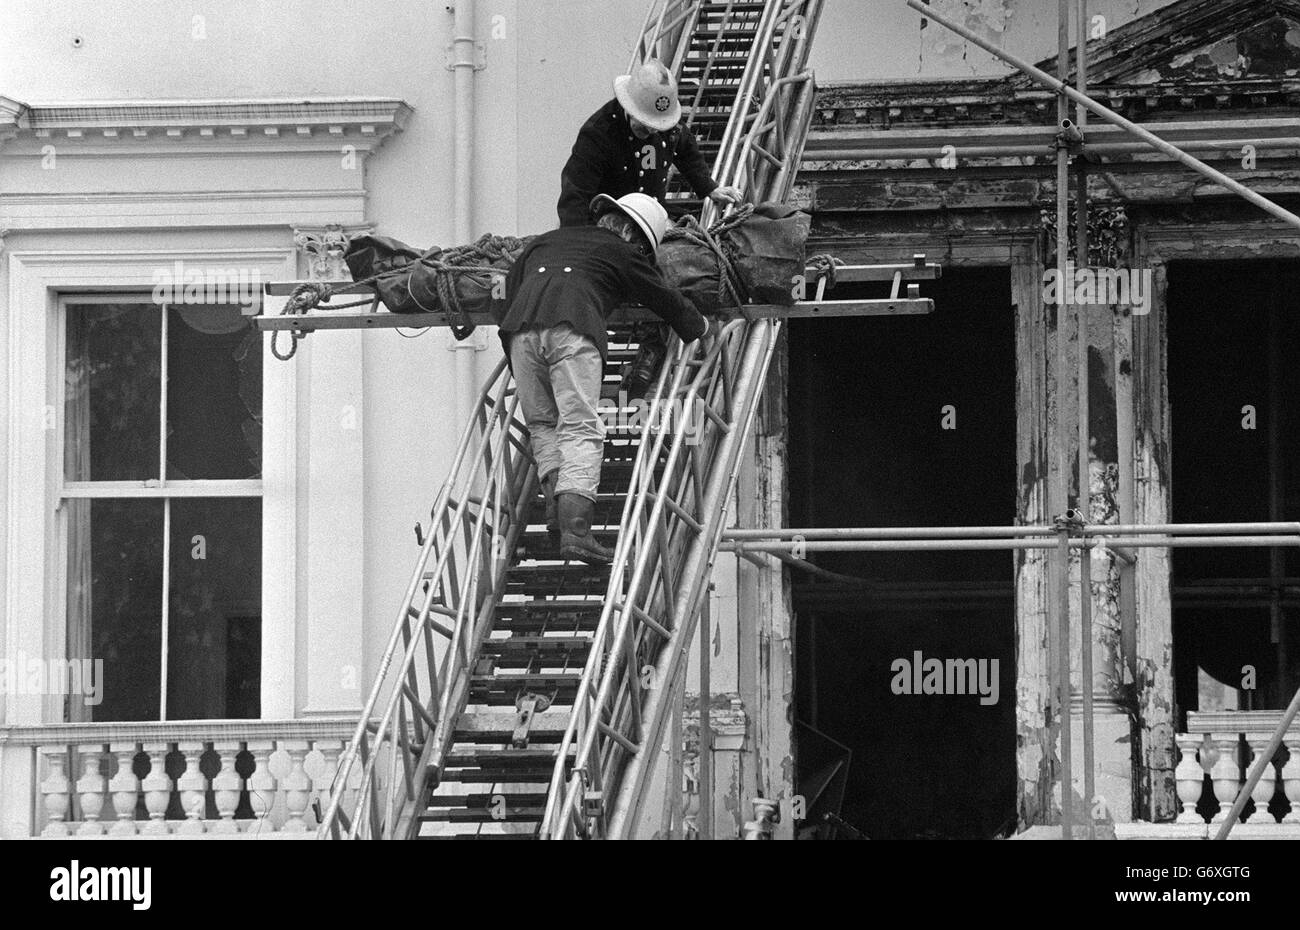 Firemen removing one of two bodies so far found in the burnt-out remains of the Iranian Embassy in London. The corpse, wrapped in a dark green body bag, was lowered from a second floor front window of the building in Princes gate, Kensington, and taken away by a hearse. Stock Photo